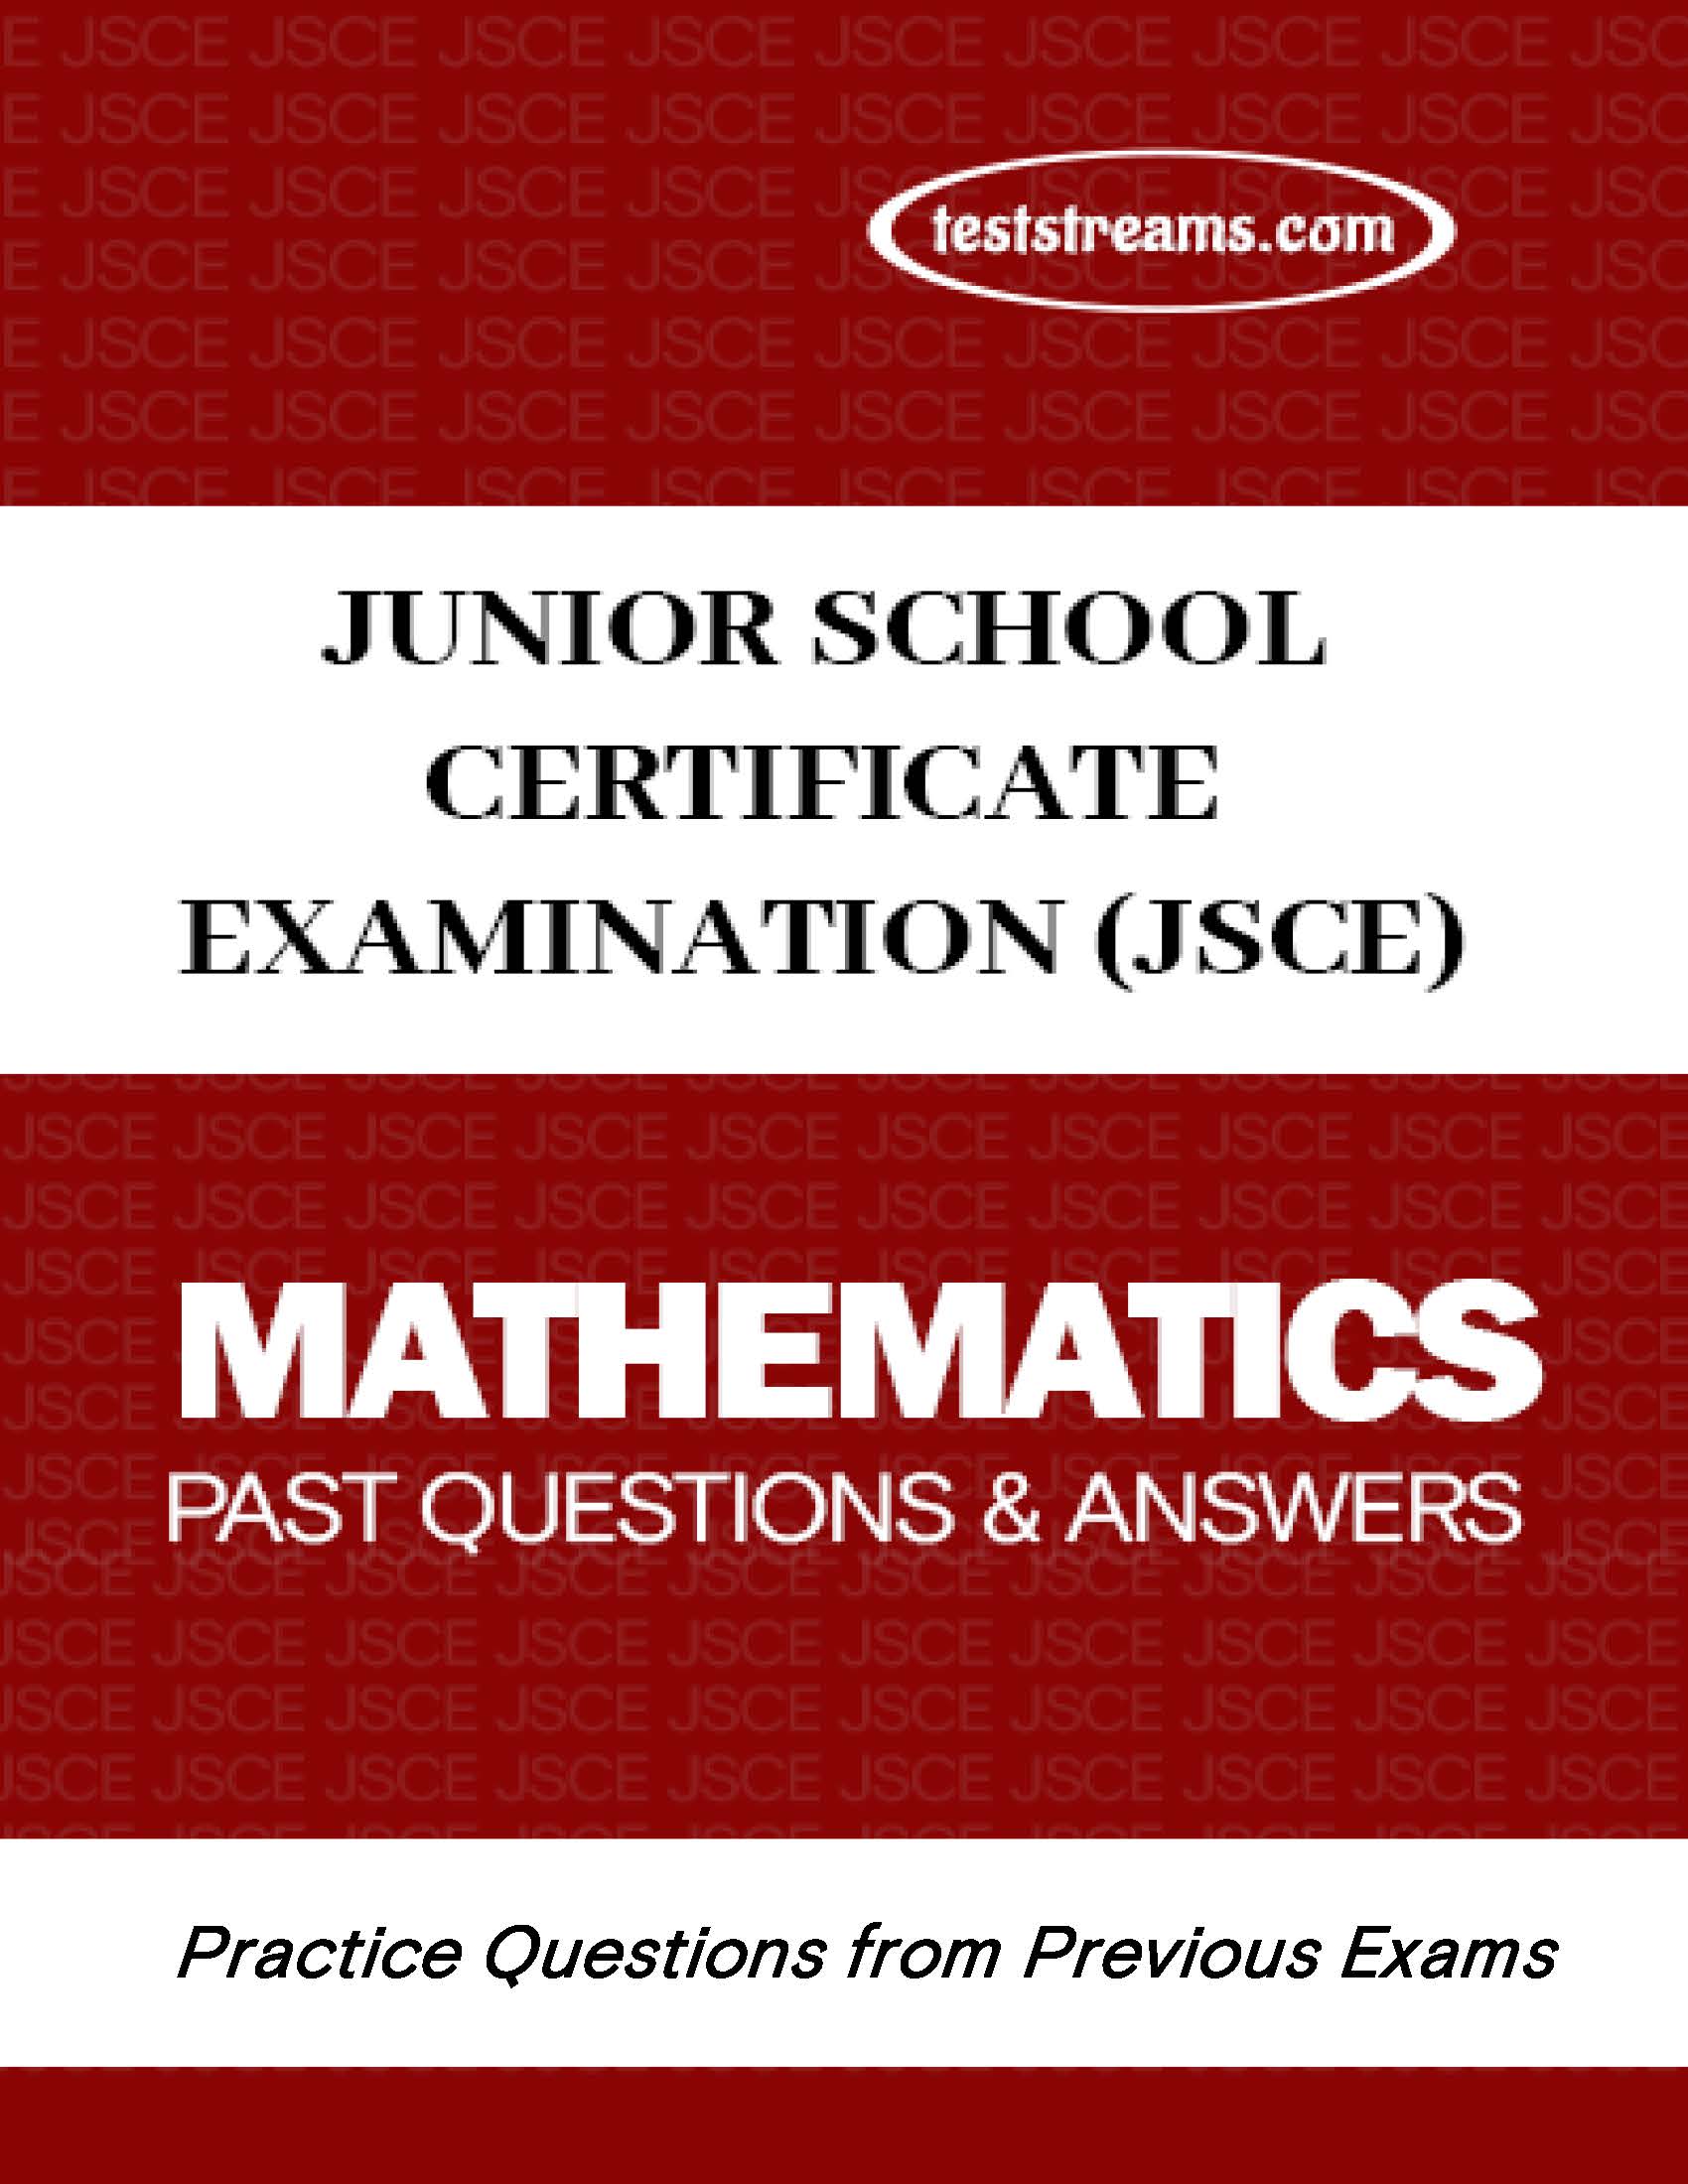 JSCE Mathematics Practice Questions and Answers MS-WORD/PDF Download